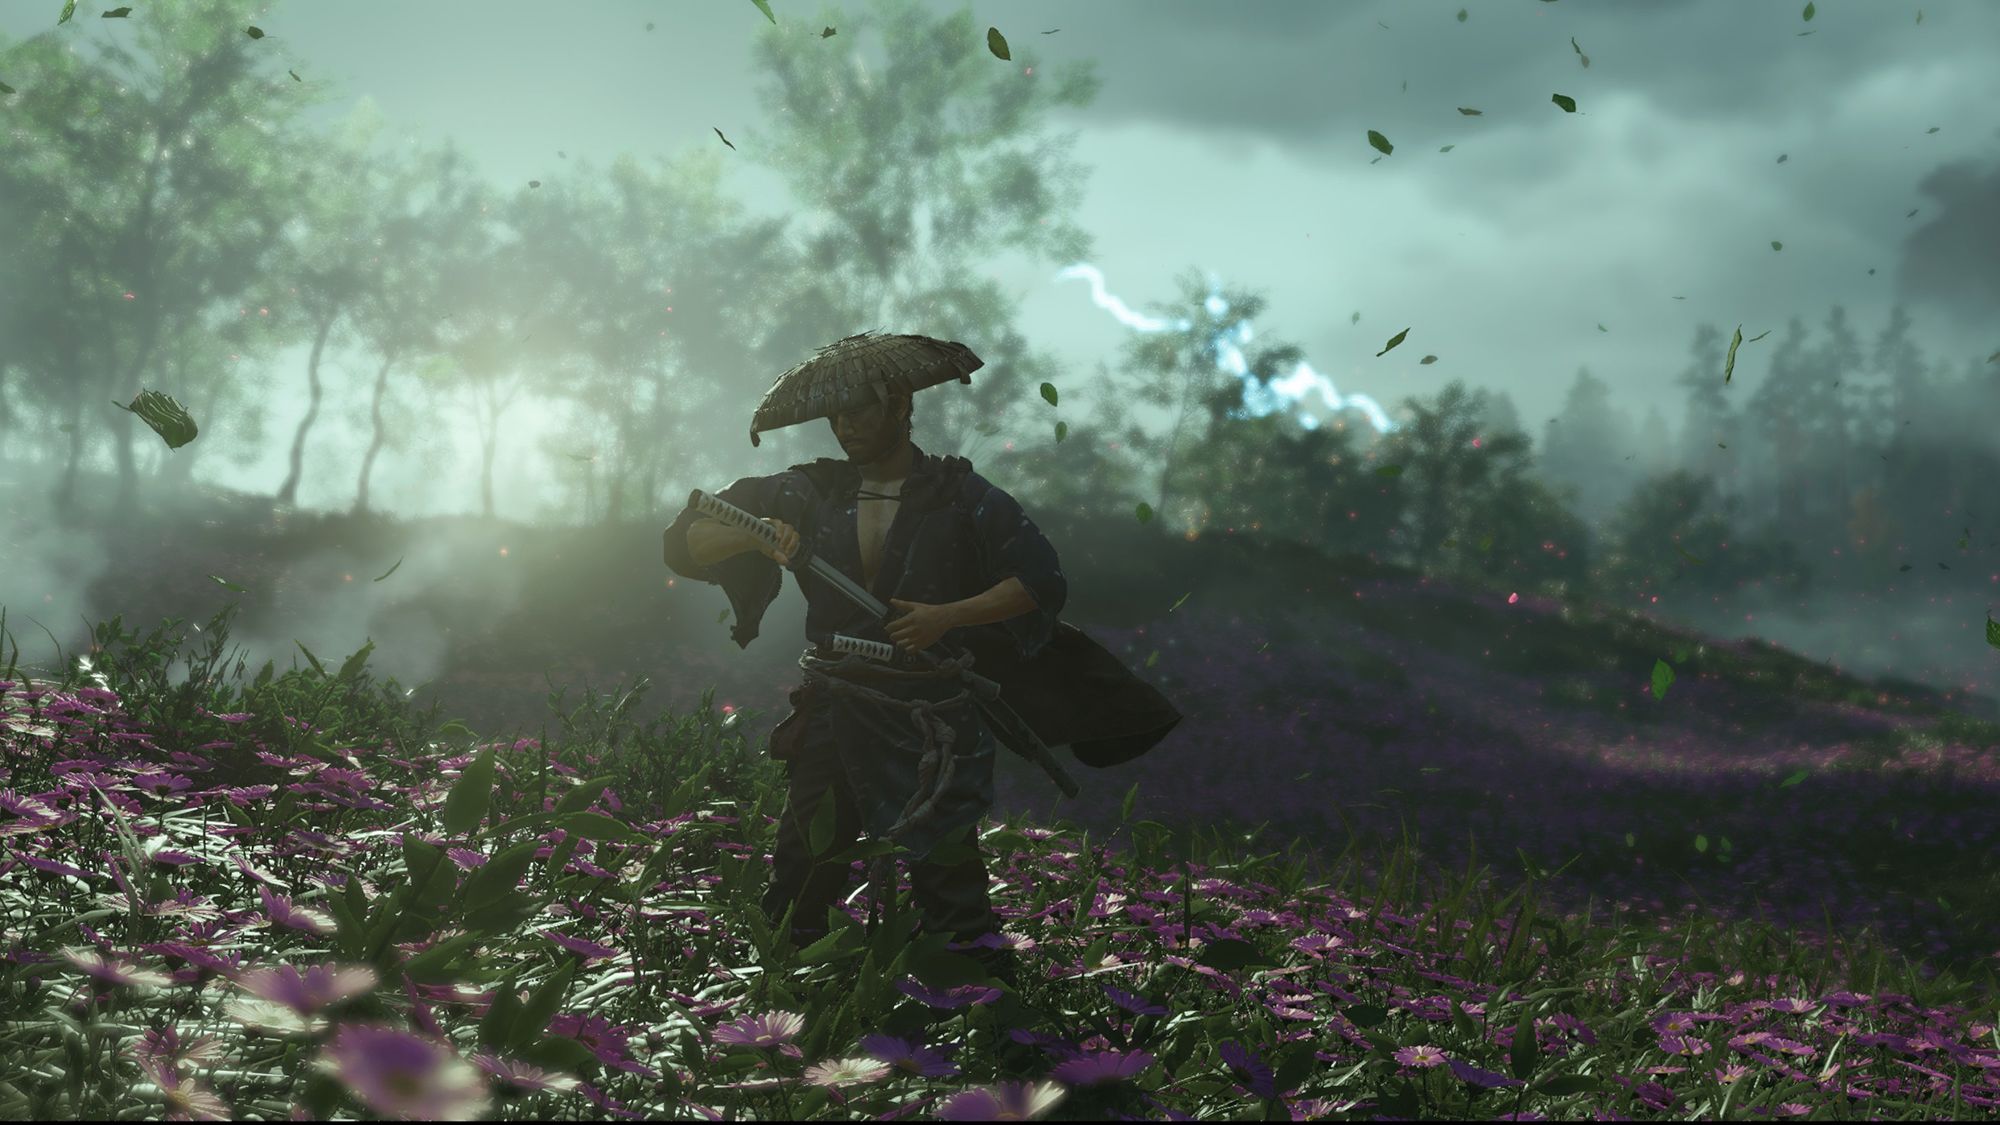 Ghost of Tsushima, the last PS4 exclusive, comes out on Friday